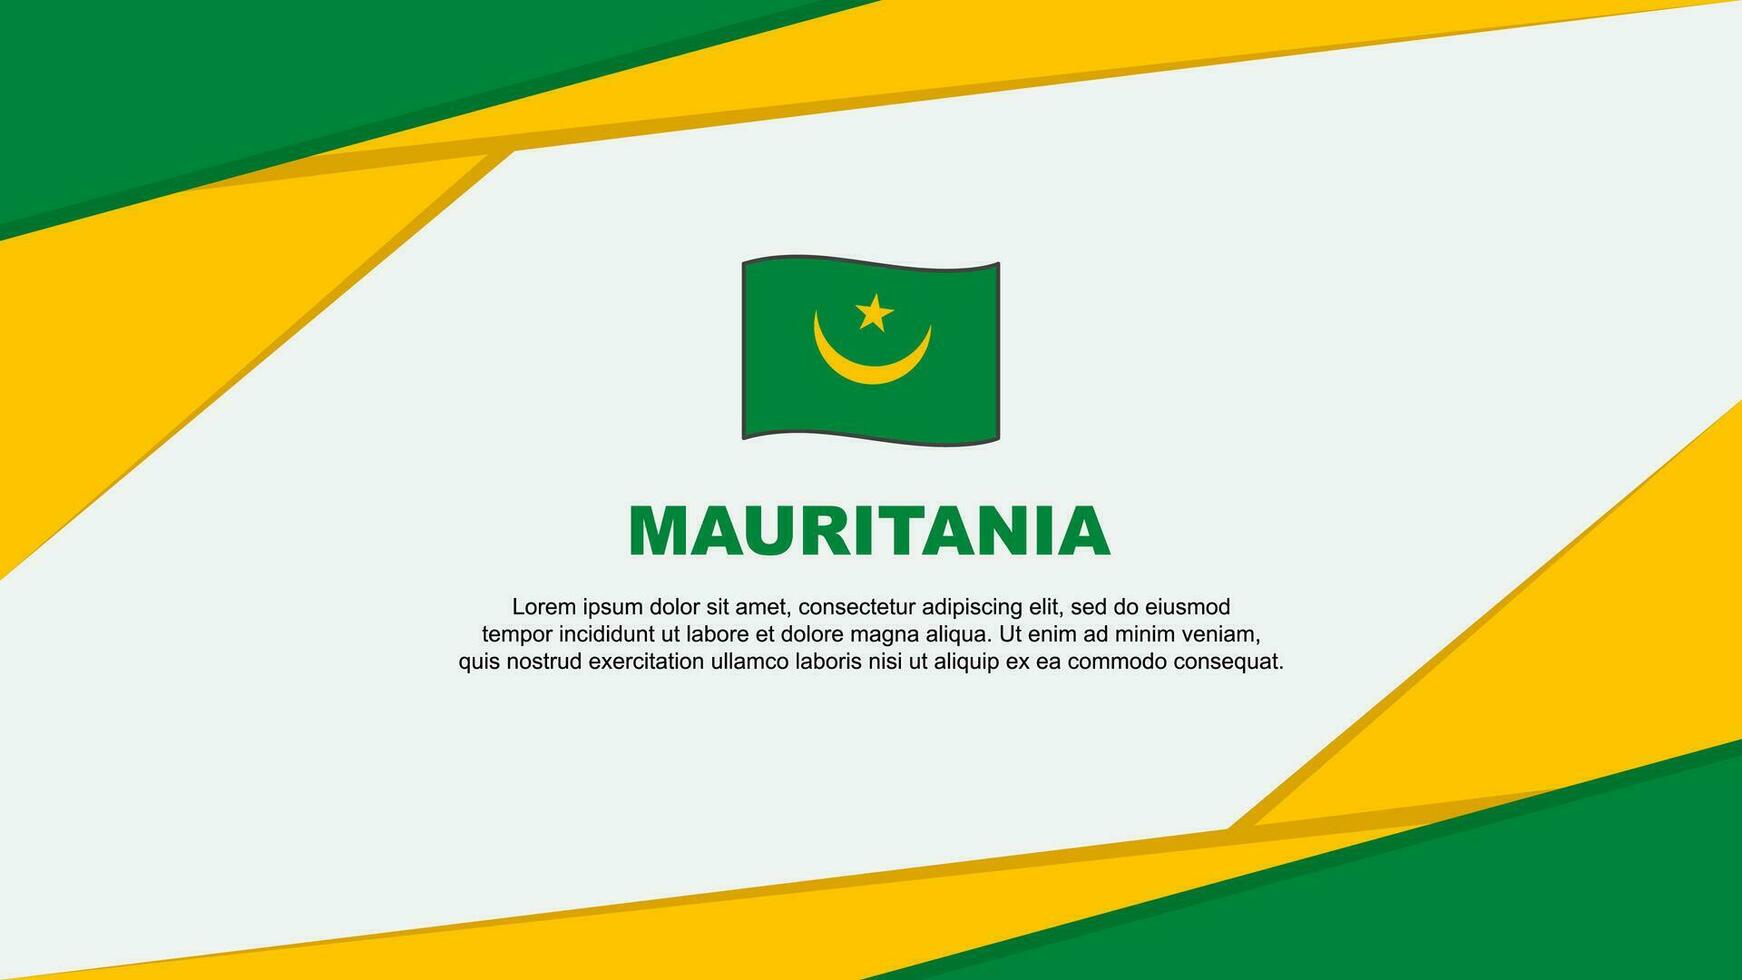 Mauritania Flag Abstract Background Design Template. Mauritania Independence Day Banner Cartoon Vector Illustration